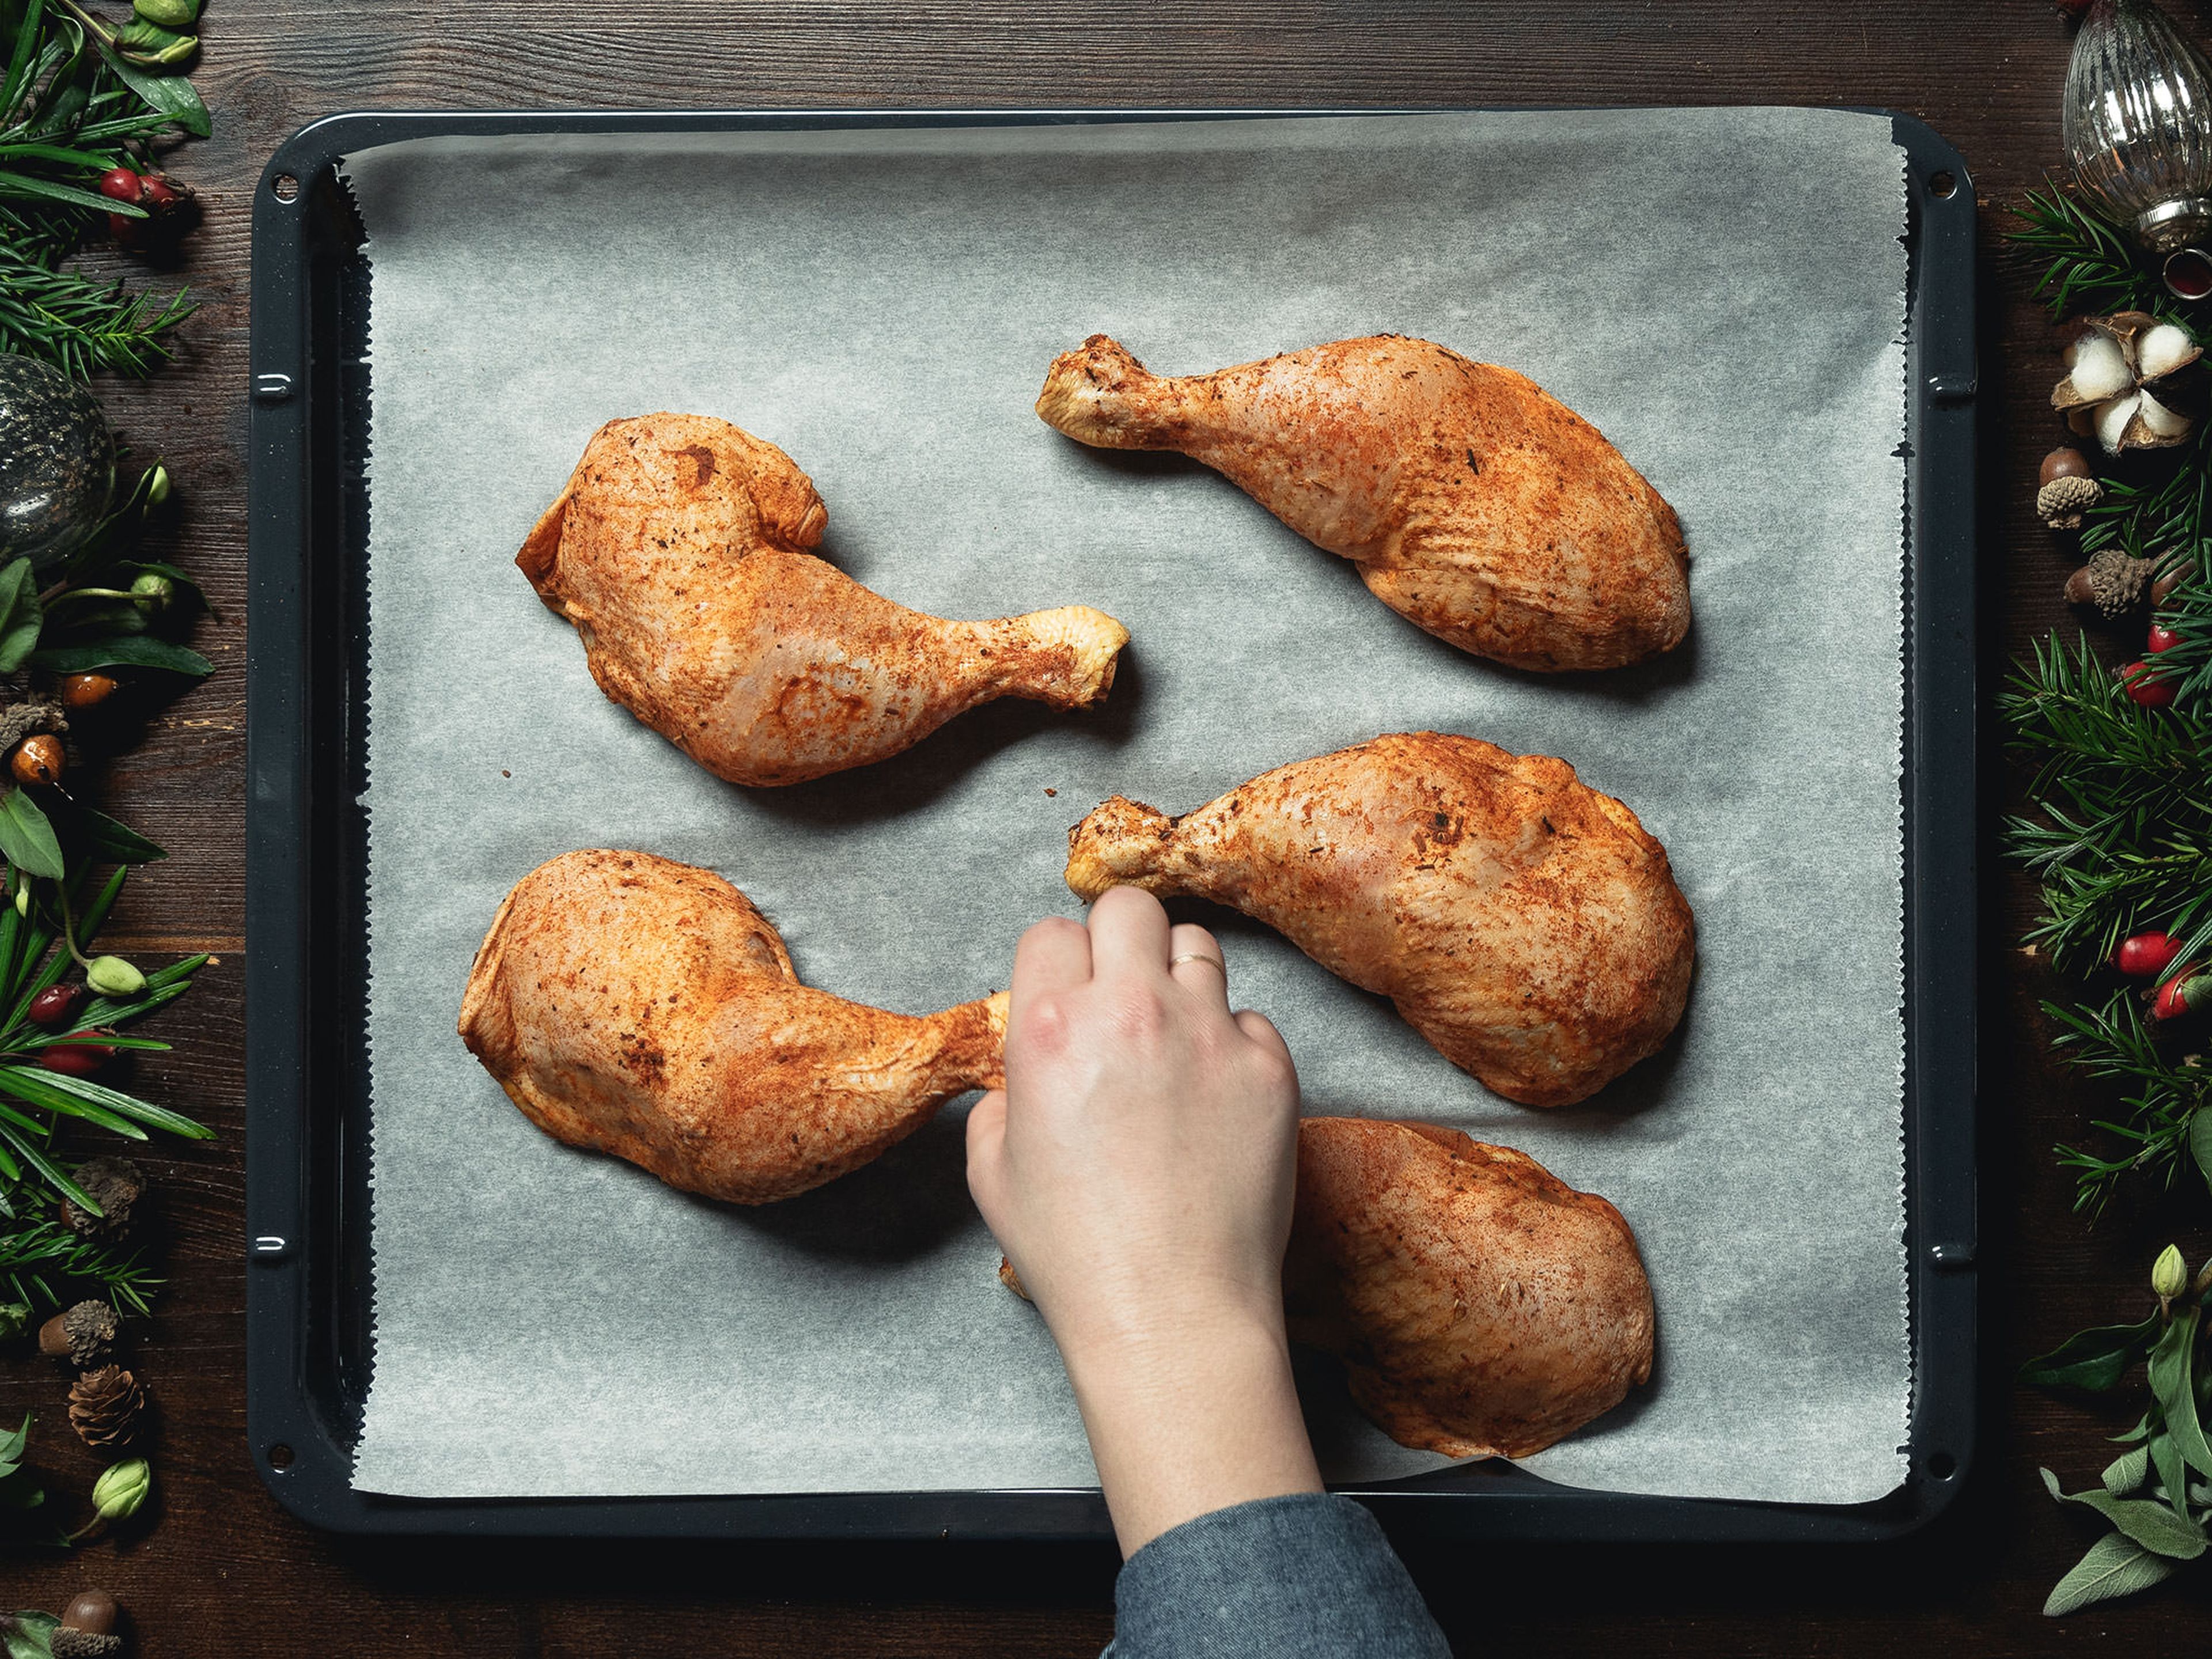 Preheat the oven to 180°C/350°F. Transfer chicken legs to a parchment lined baking sheet and bake for approx. 20 min.